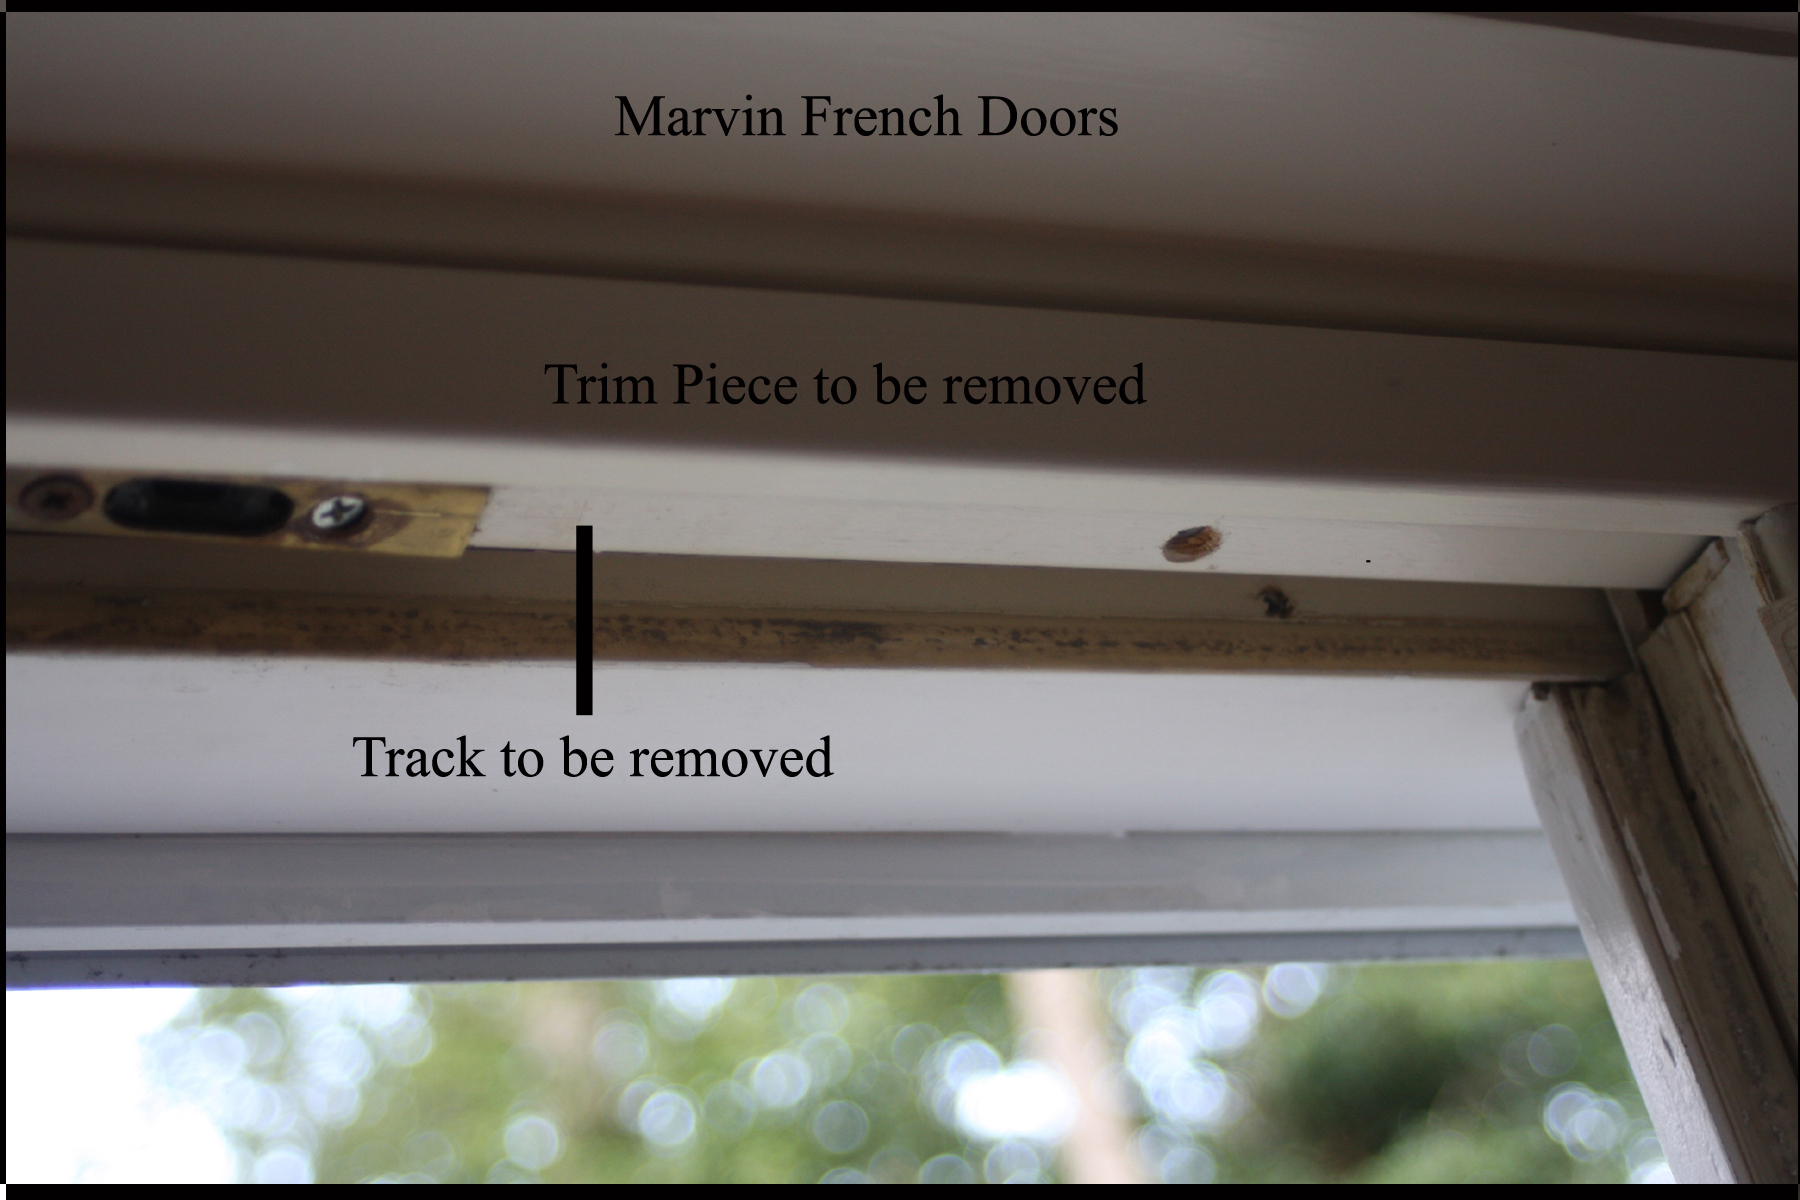 Marvin wood French doors - Shows track that must be removed to remove door from frame